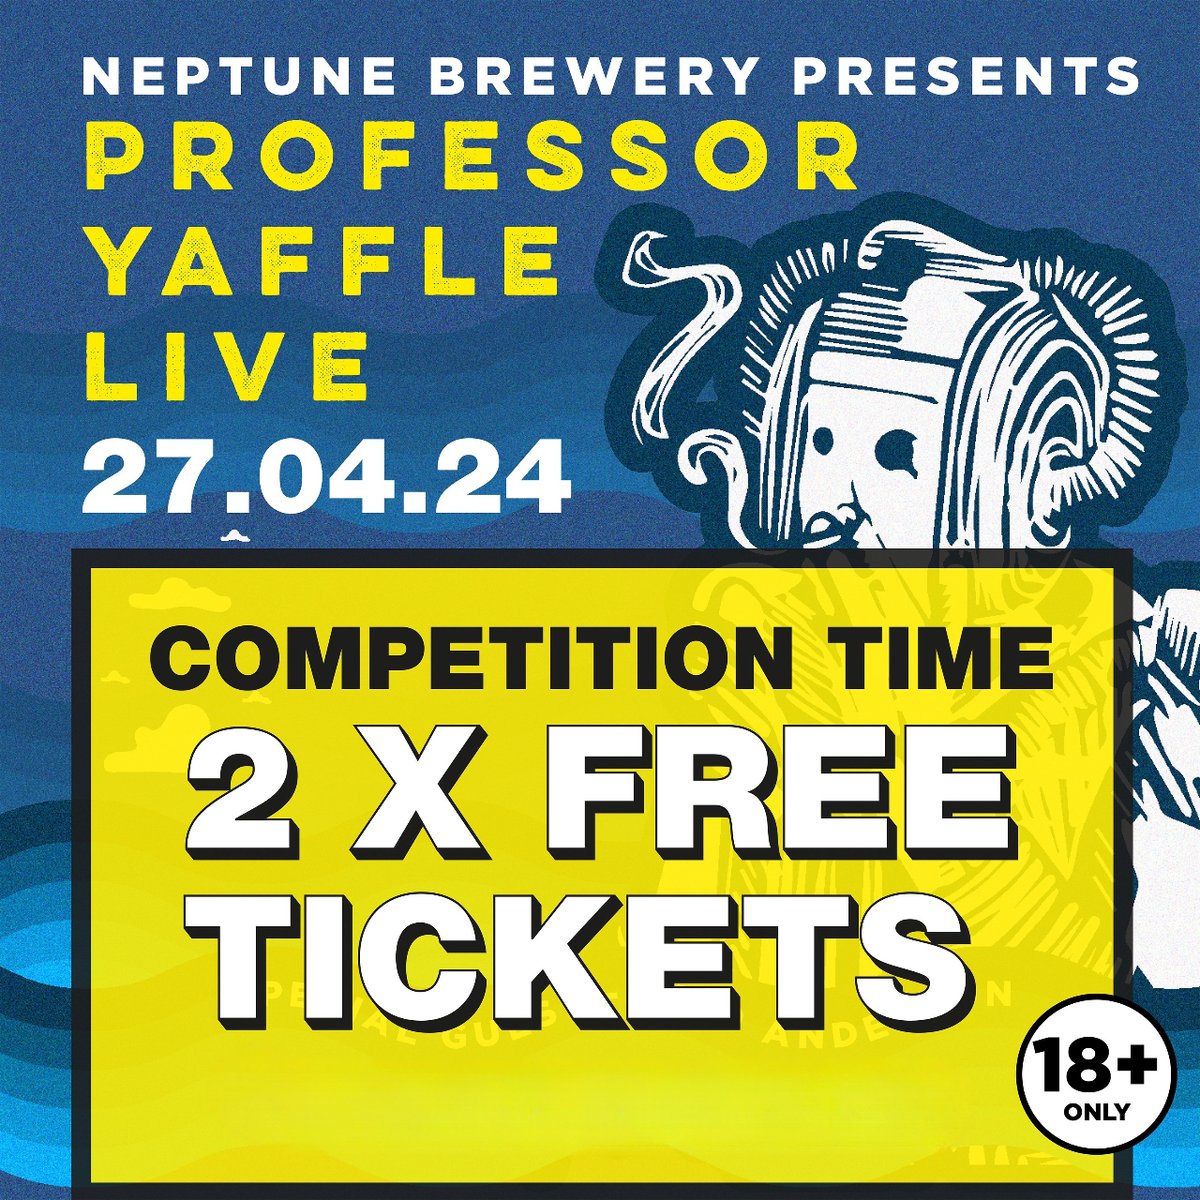 🔱 𝗖𝗢𝗠𝗣𝗘𝗧𝗜𝗧𝗜𝗢𝗡 𝗧𝗜𝗠𝗘! 🔱 If you’d like to be in with a chance of winning 2 tickets to the sold-out @ToffeeYaffle gig at our brewery this Saturday, head over to our Instagram page: i.mtr.cool/qyxdcgxjuz (𝘊𝘰𝘮𝘱𝘦𝘵𝘪𝘵𝘪𝘰𝘯 𝘤𝘭𝘰𝘴𝘦𝘴 23:59 𝘰𝘯 23.04.24)